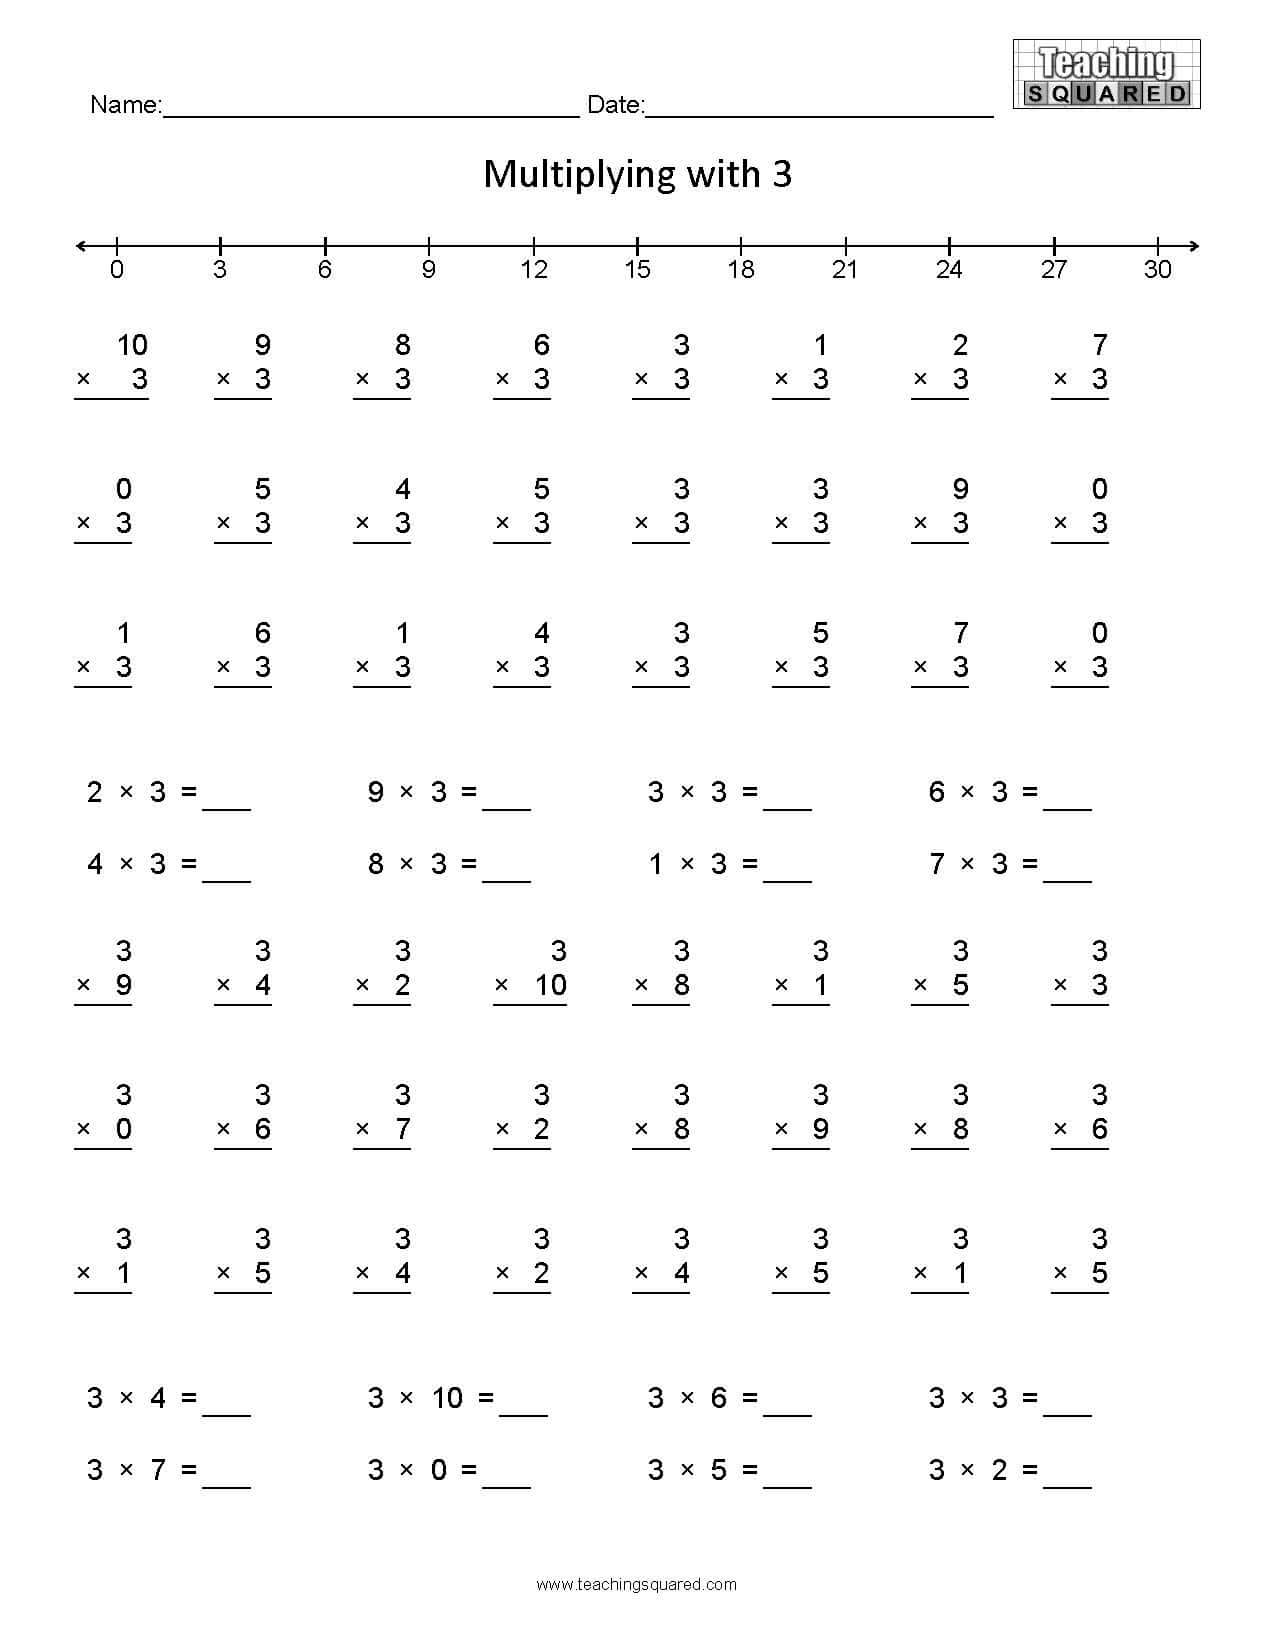 Multiplying with 3 multiplication worksheets